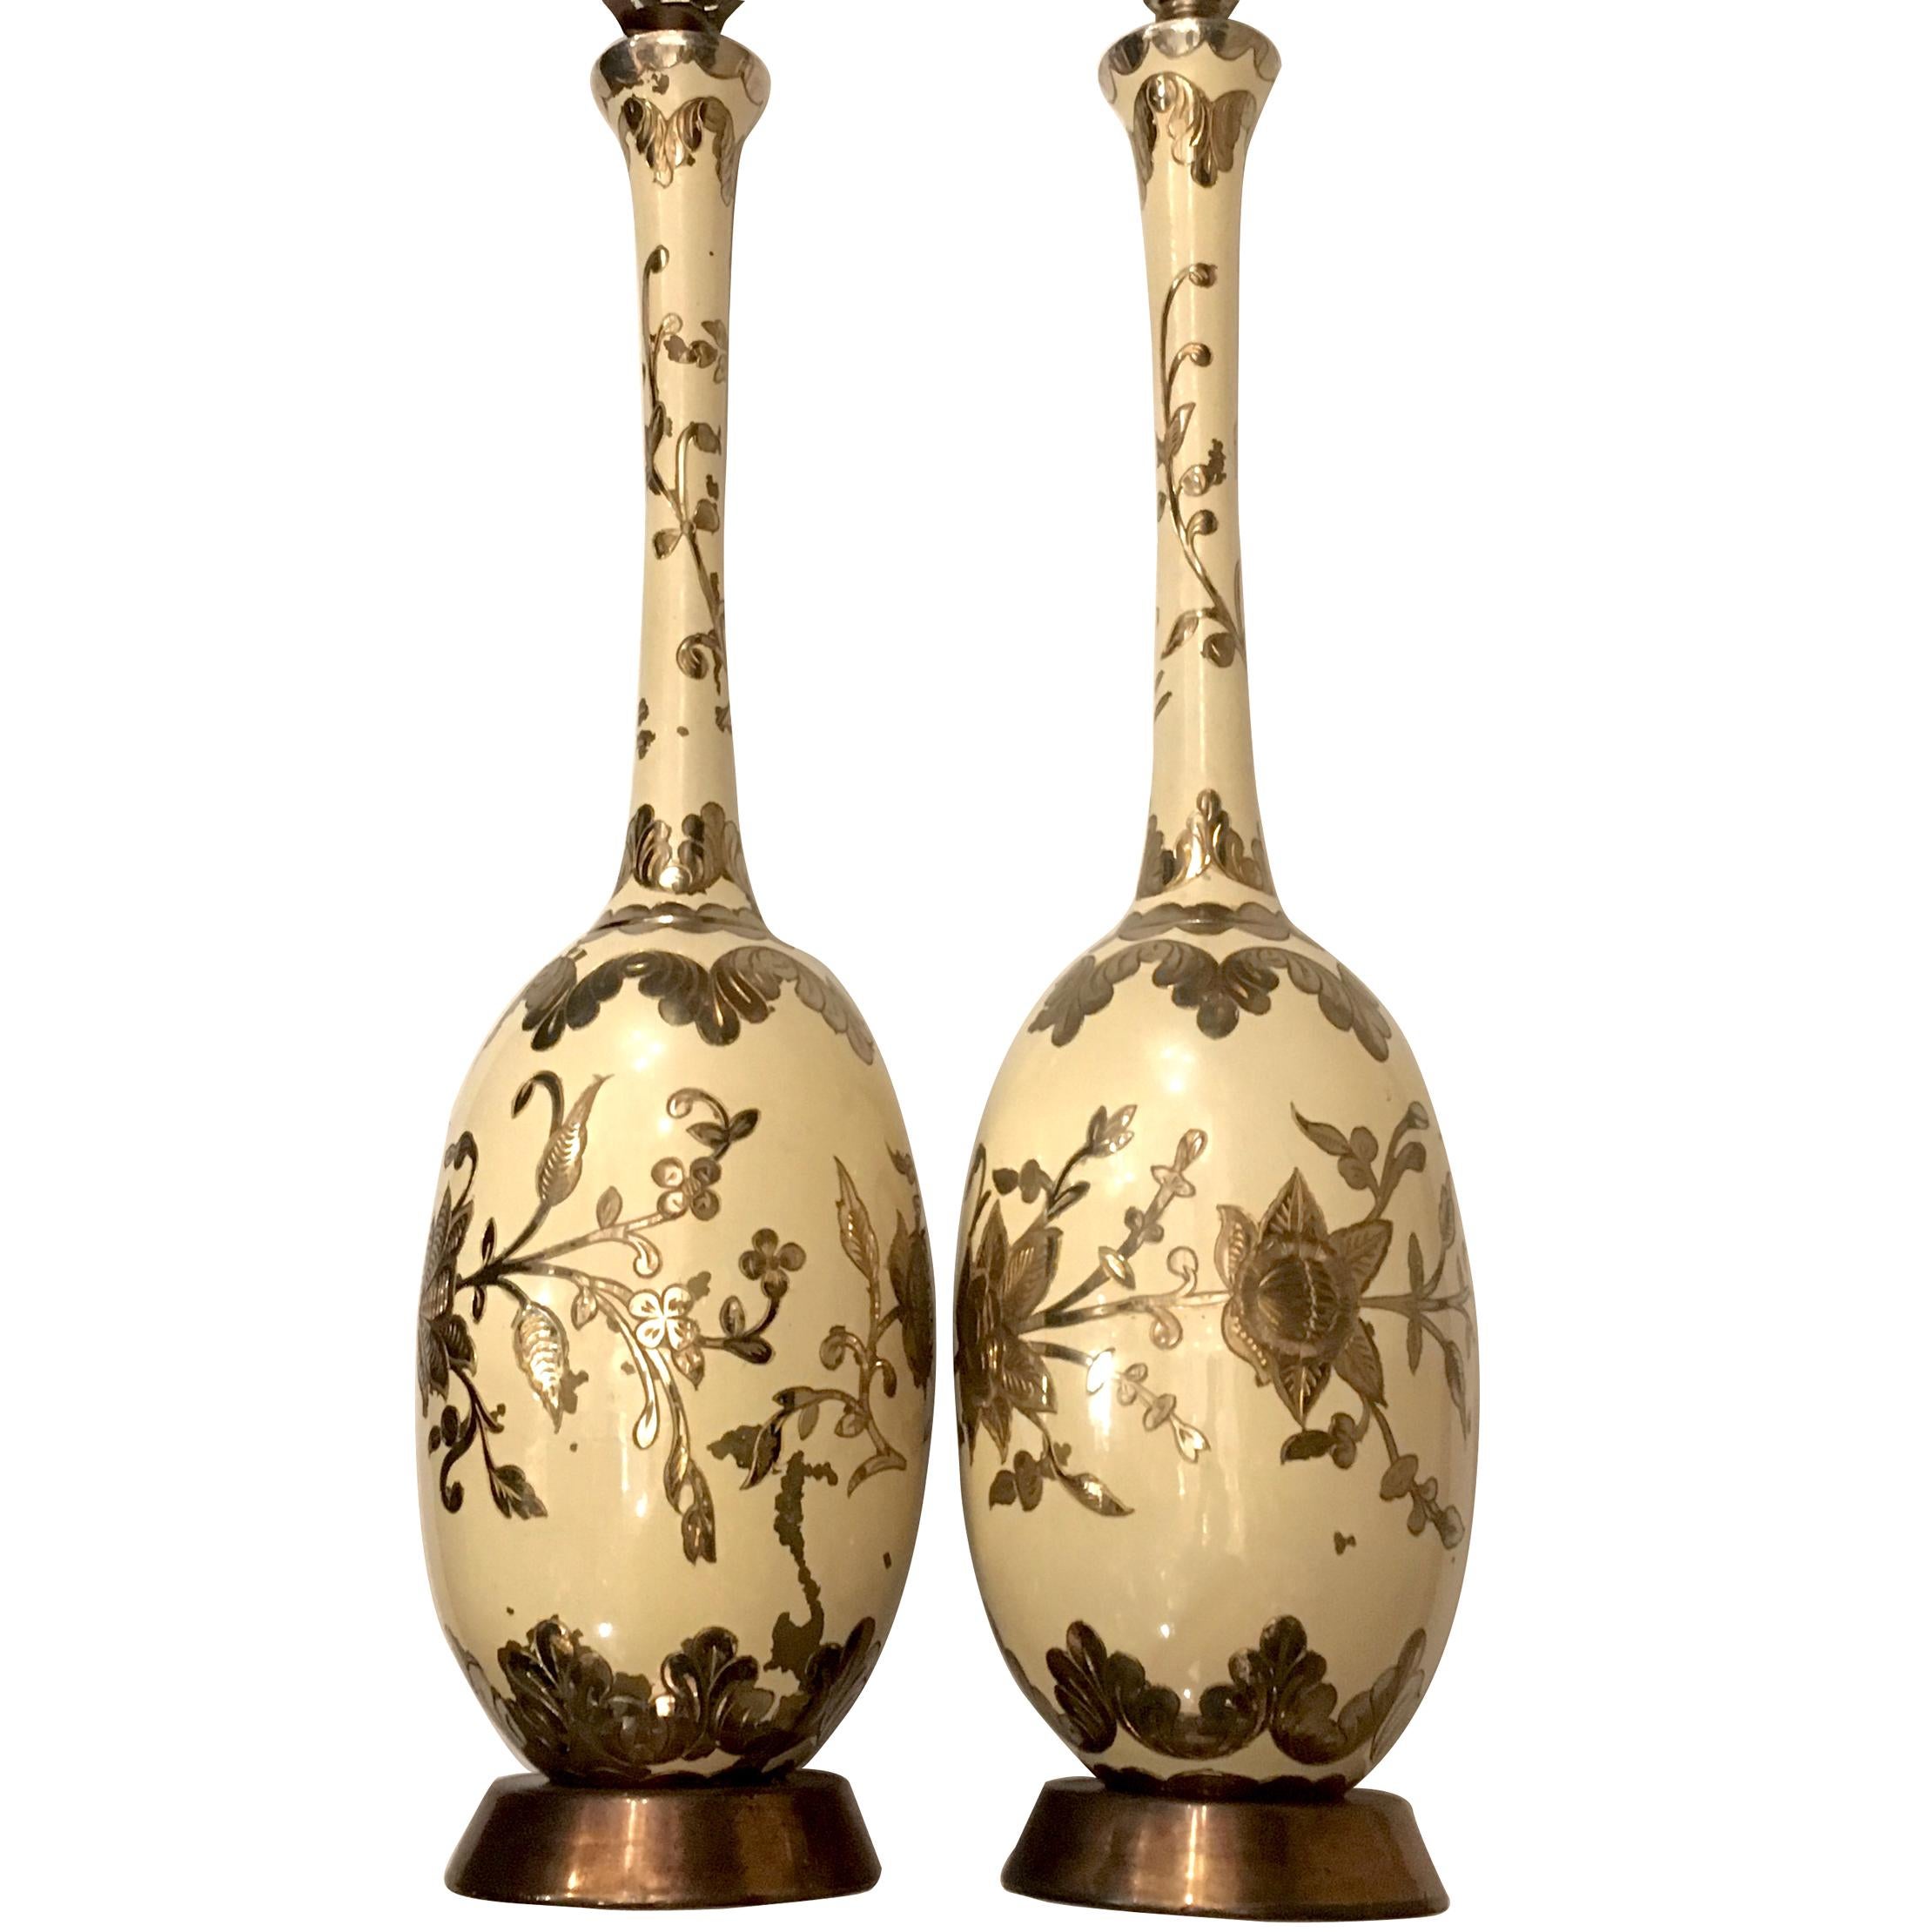 Pair of tall hammered and etched brass table lamps with foliage motif, and with original patinated and painted finish. 

Measures: 25